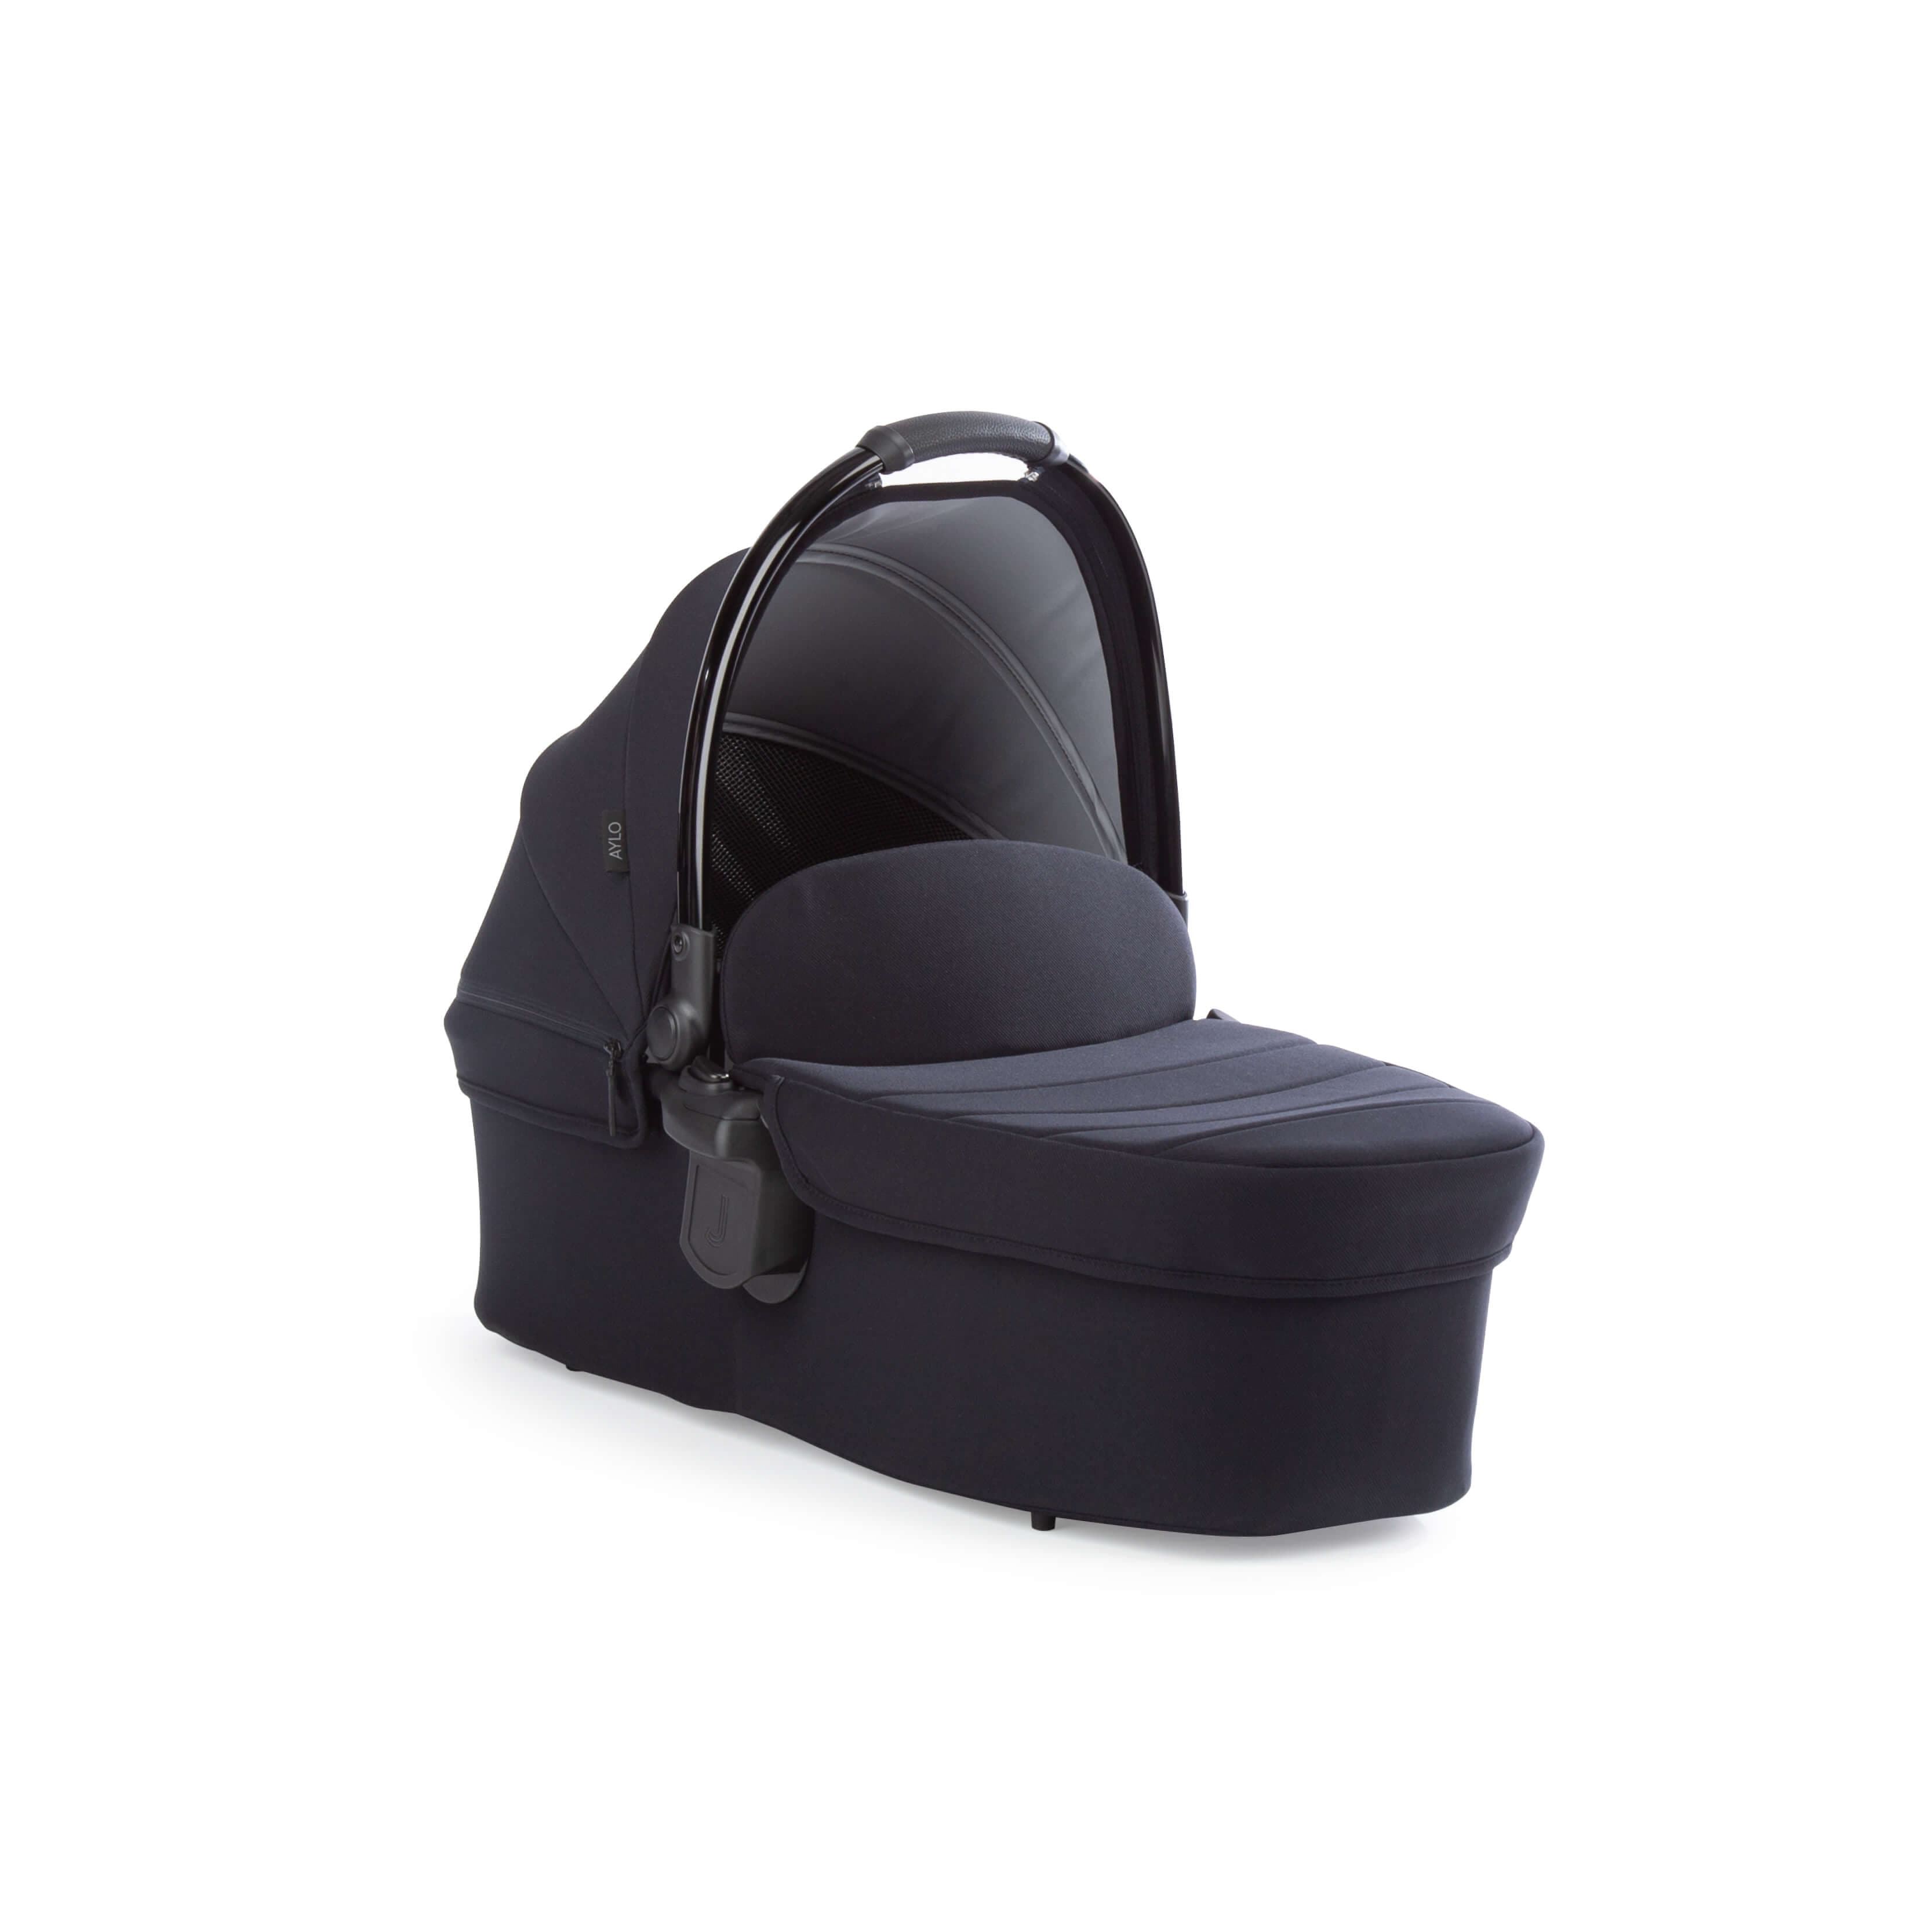 Junior Jones Aylo Rich Black 11pc Travel System inc Doona Royal Blue Car Seat - For Your Little One